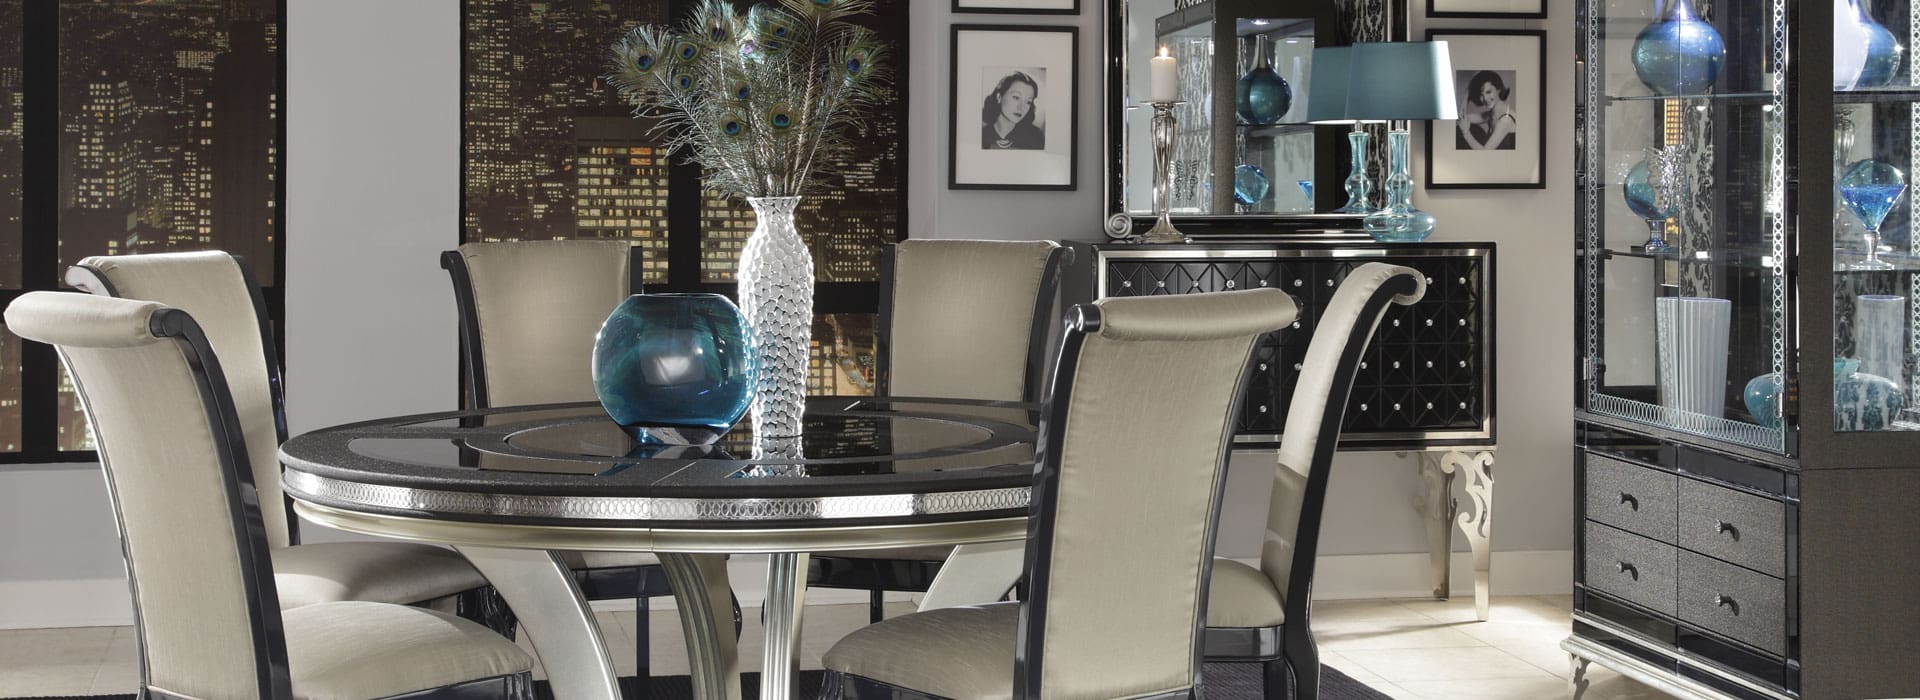 Modern Amini Hollywood Swank Round Table Dining Unique Furniture